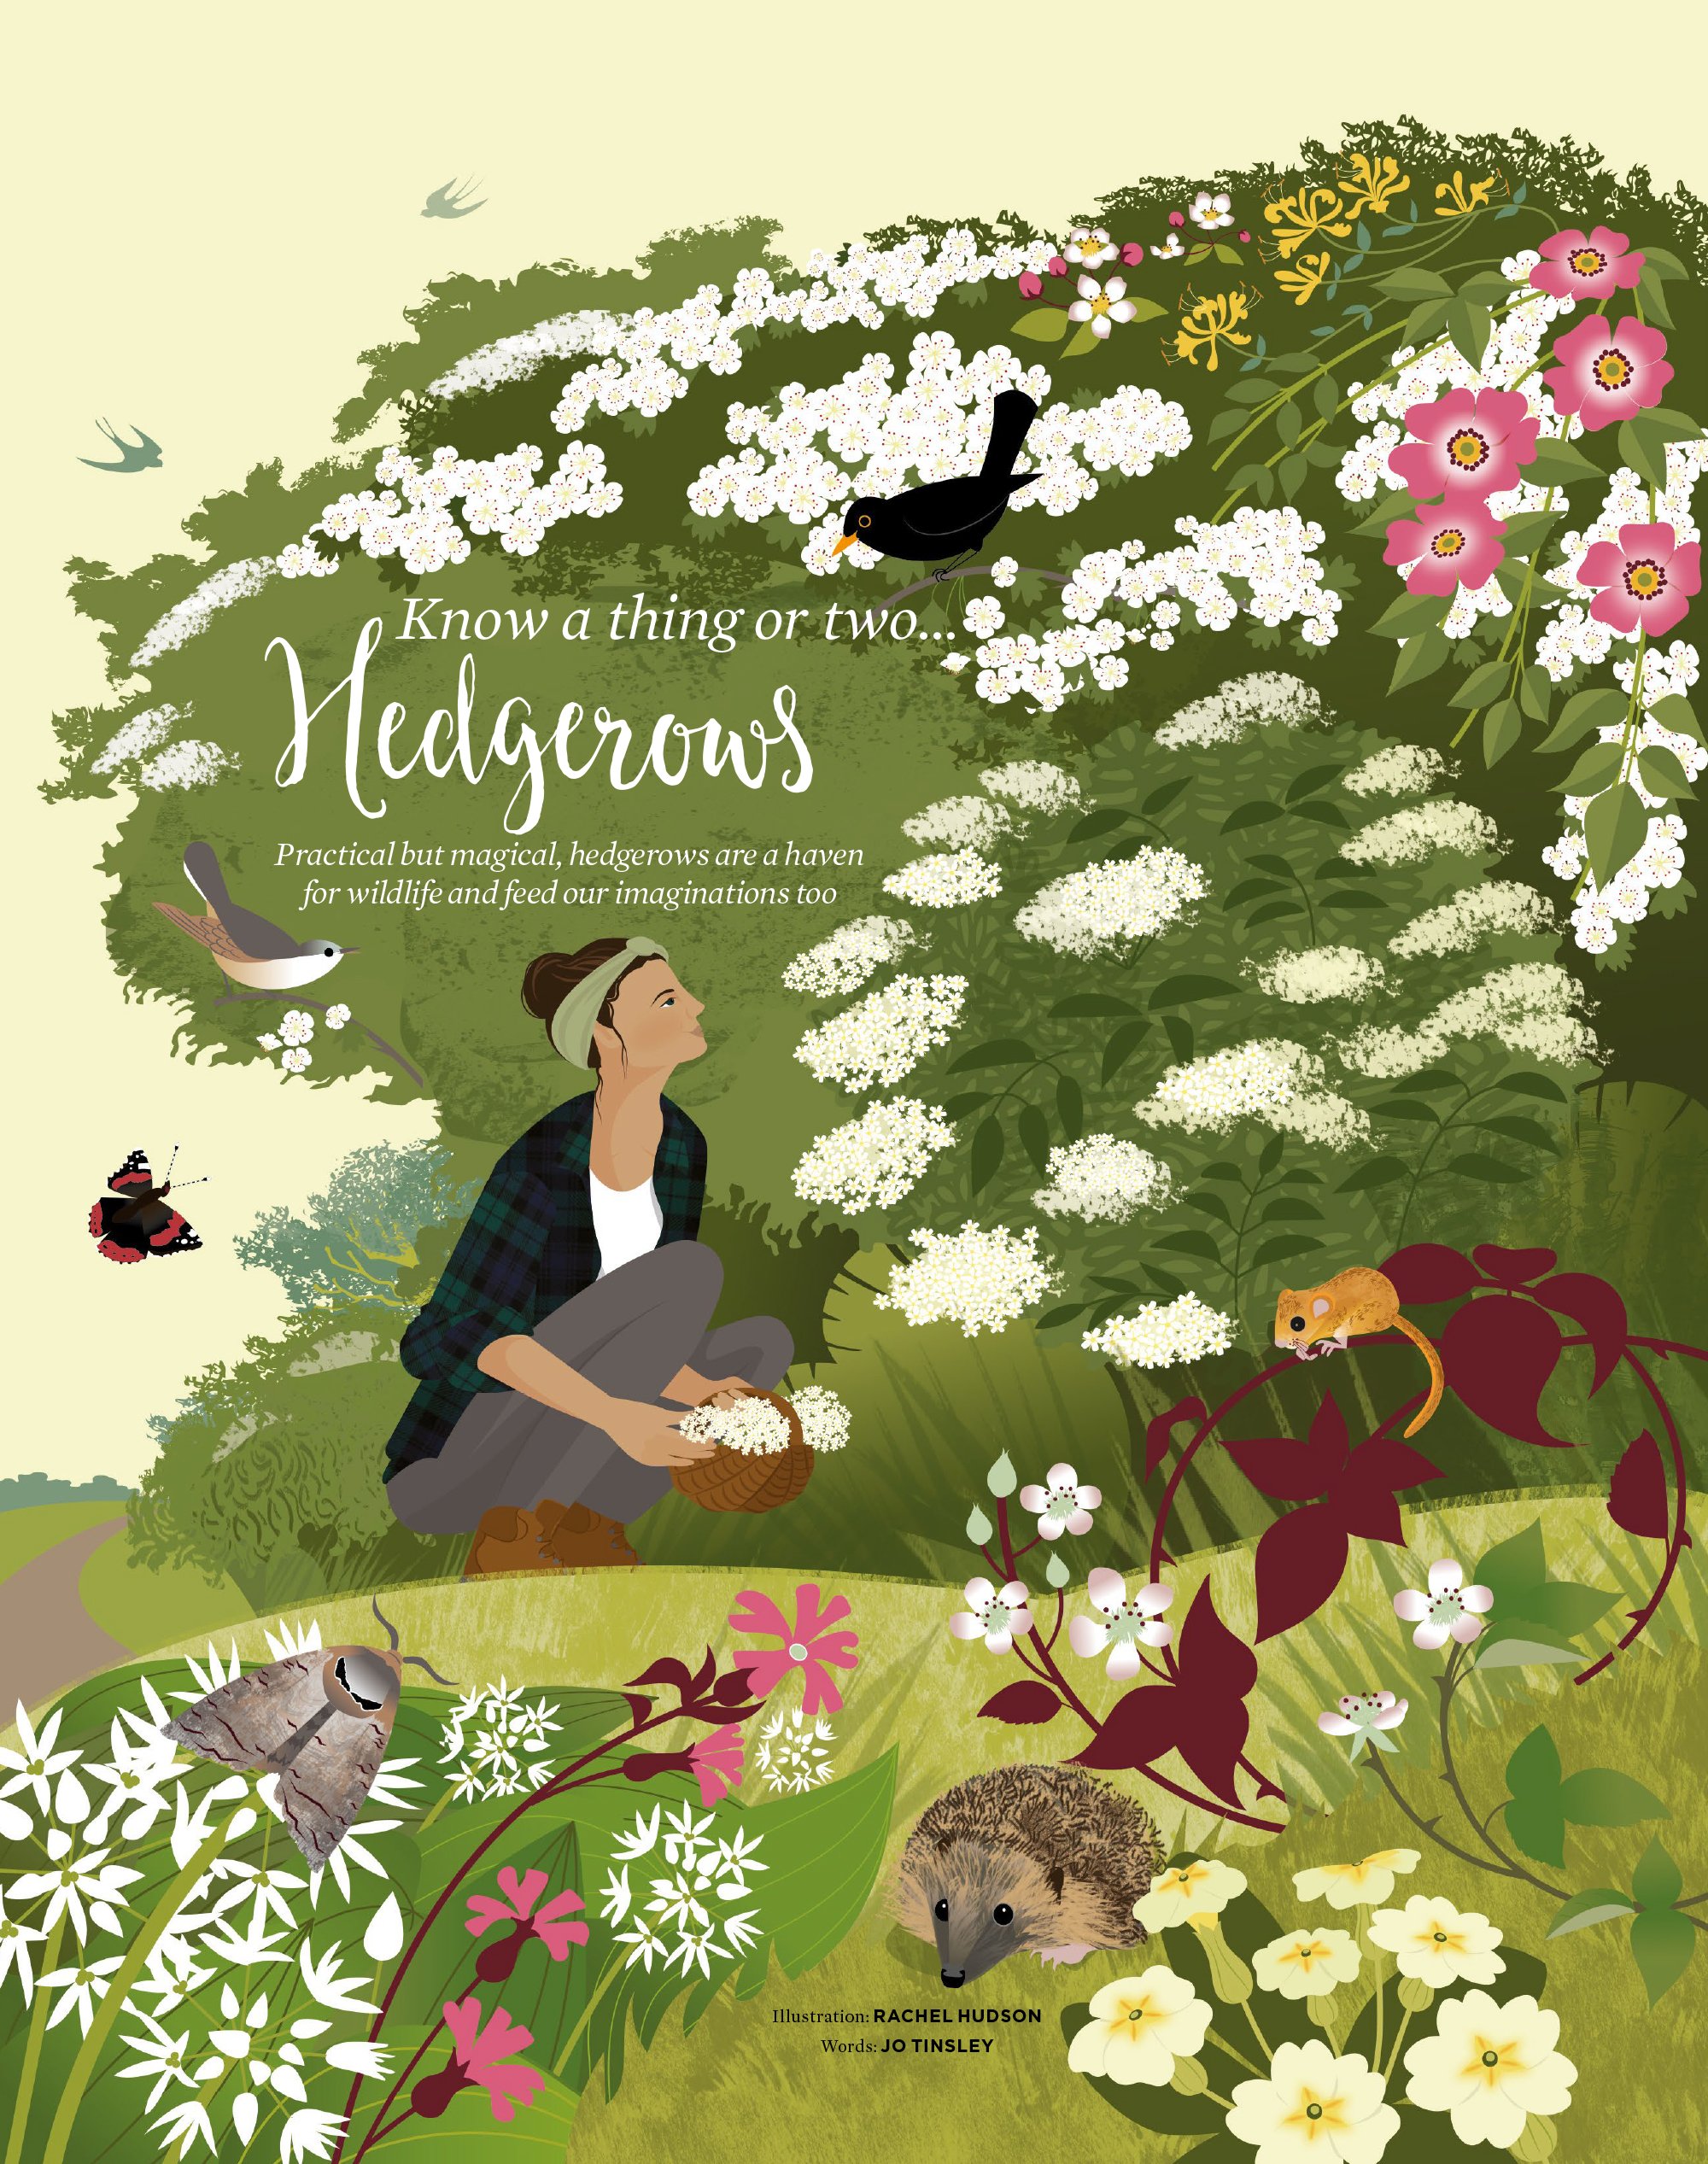 Hedgerows feature illustration by Rachel Hudson for Simple Things magazine.jpg